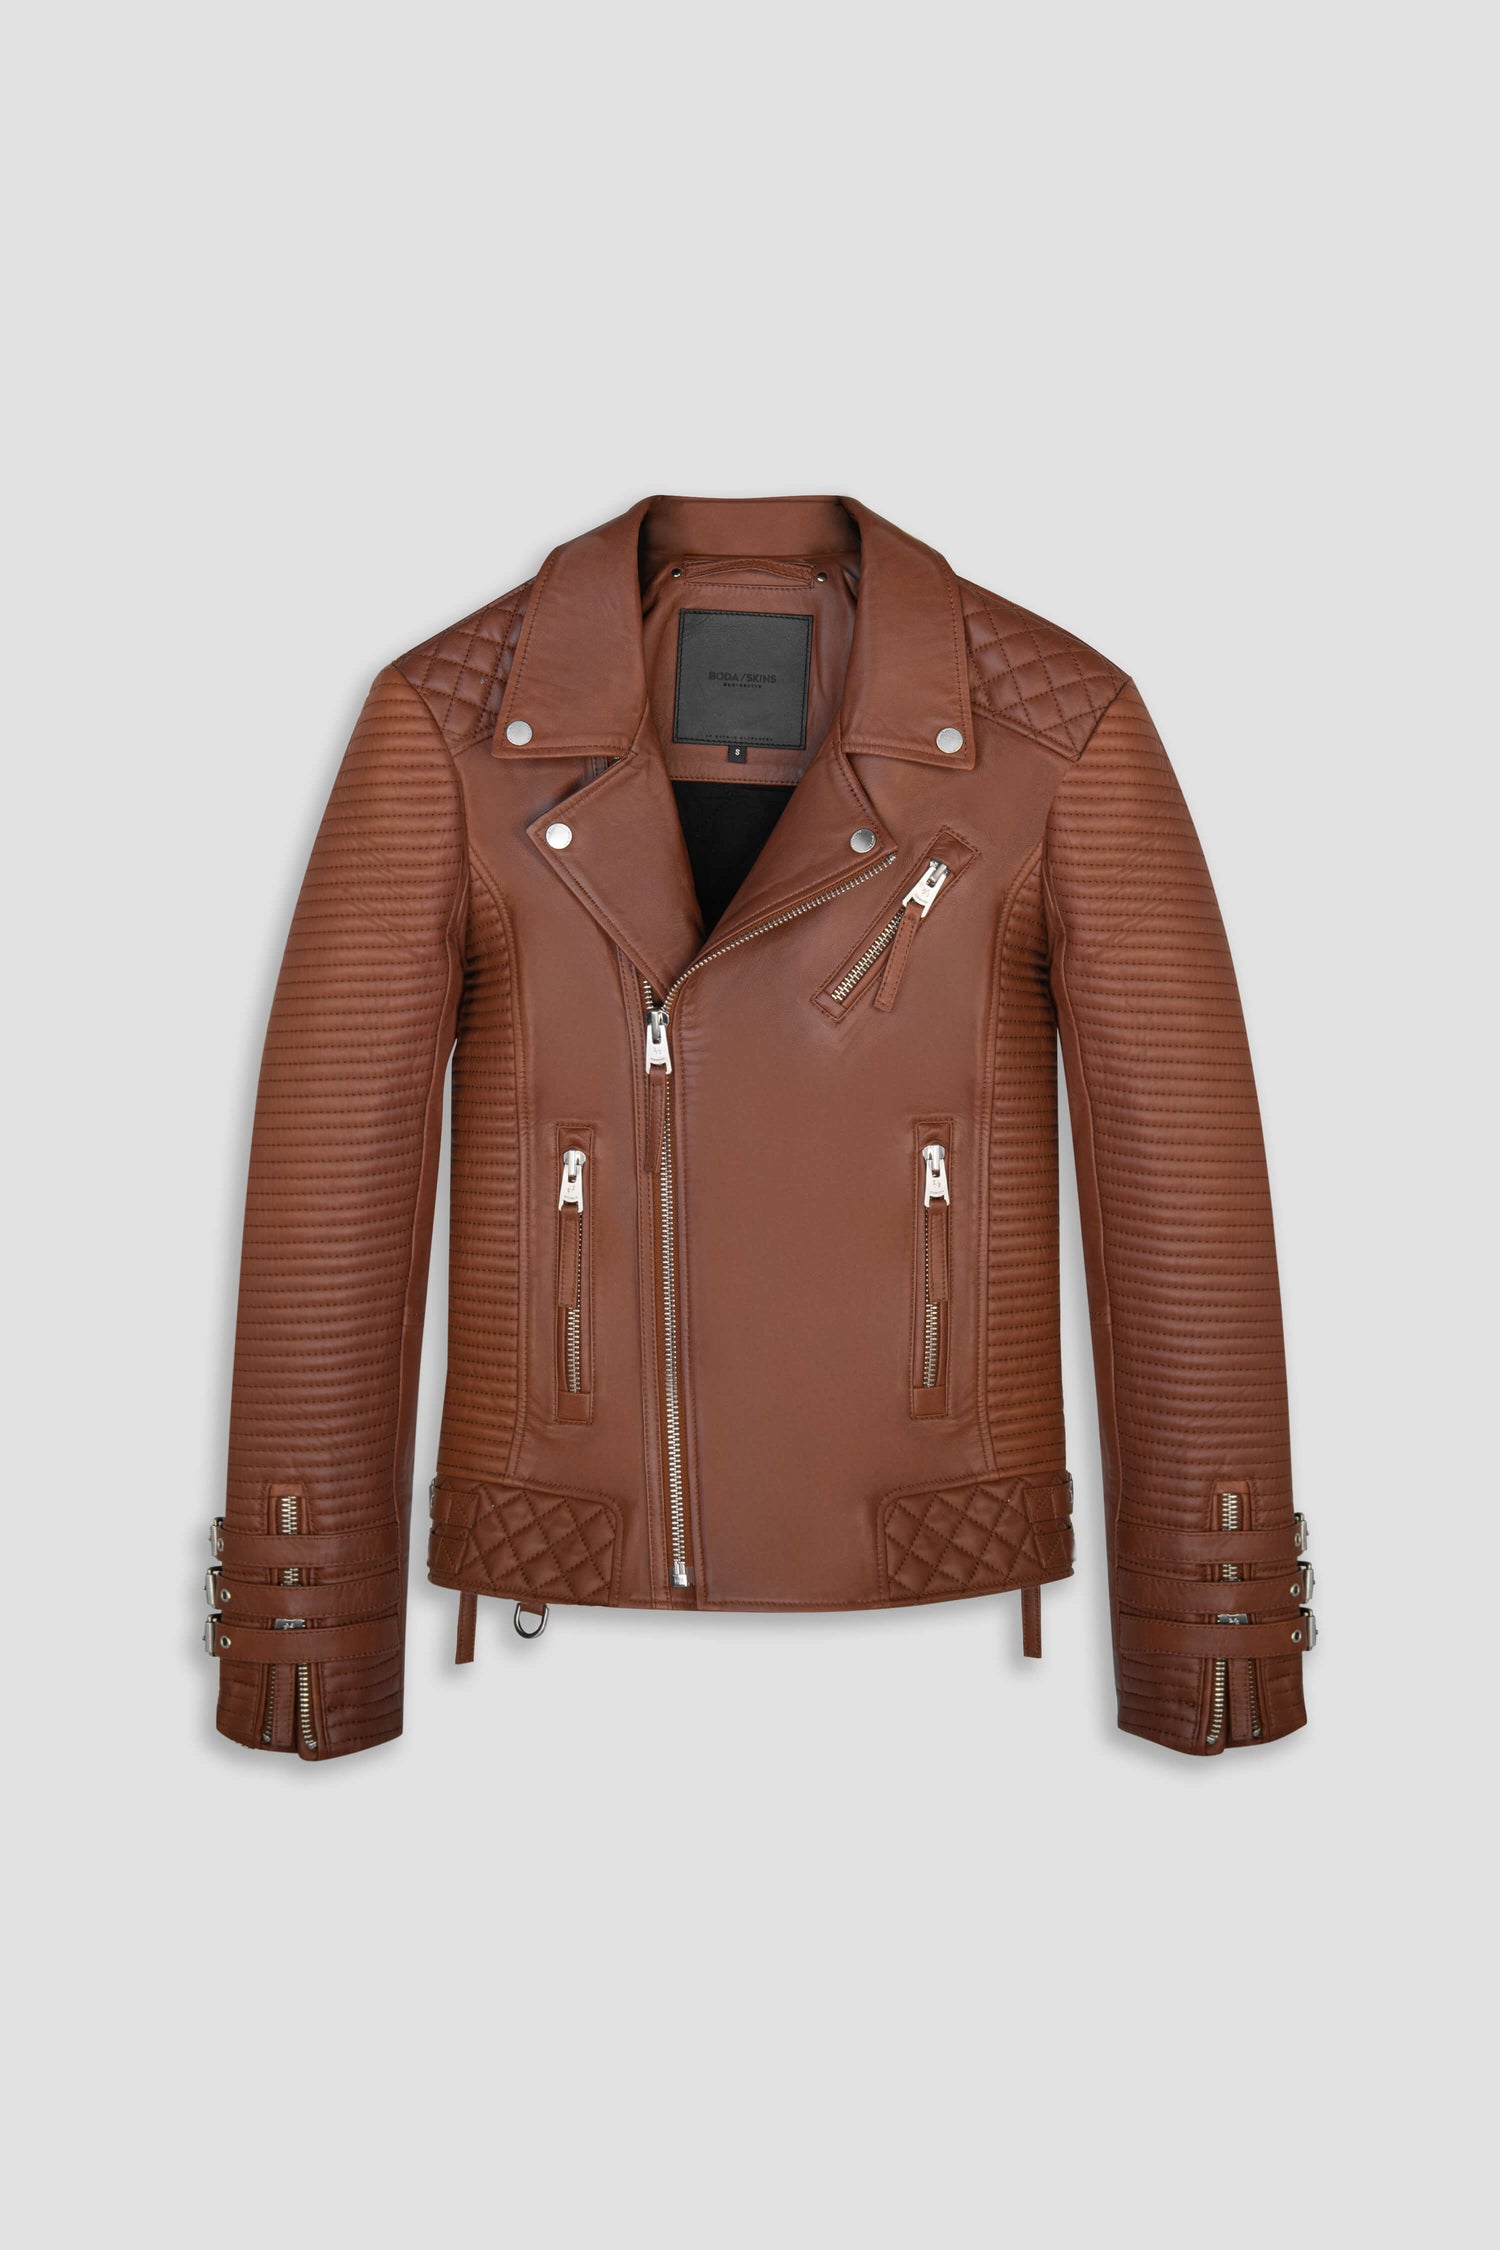 MAN JACKETS - By Created Date: Newest to Oldest